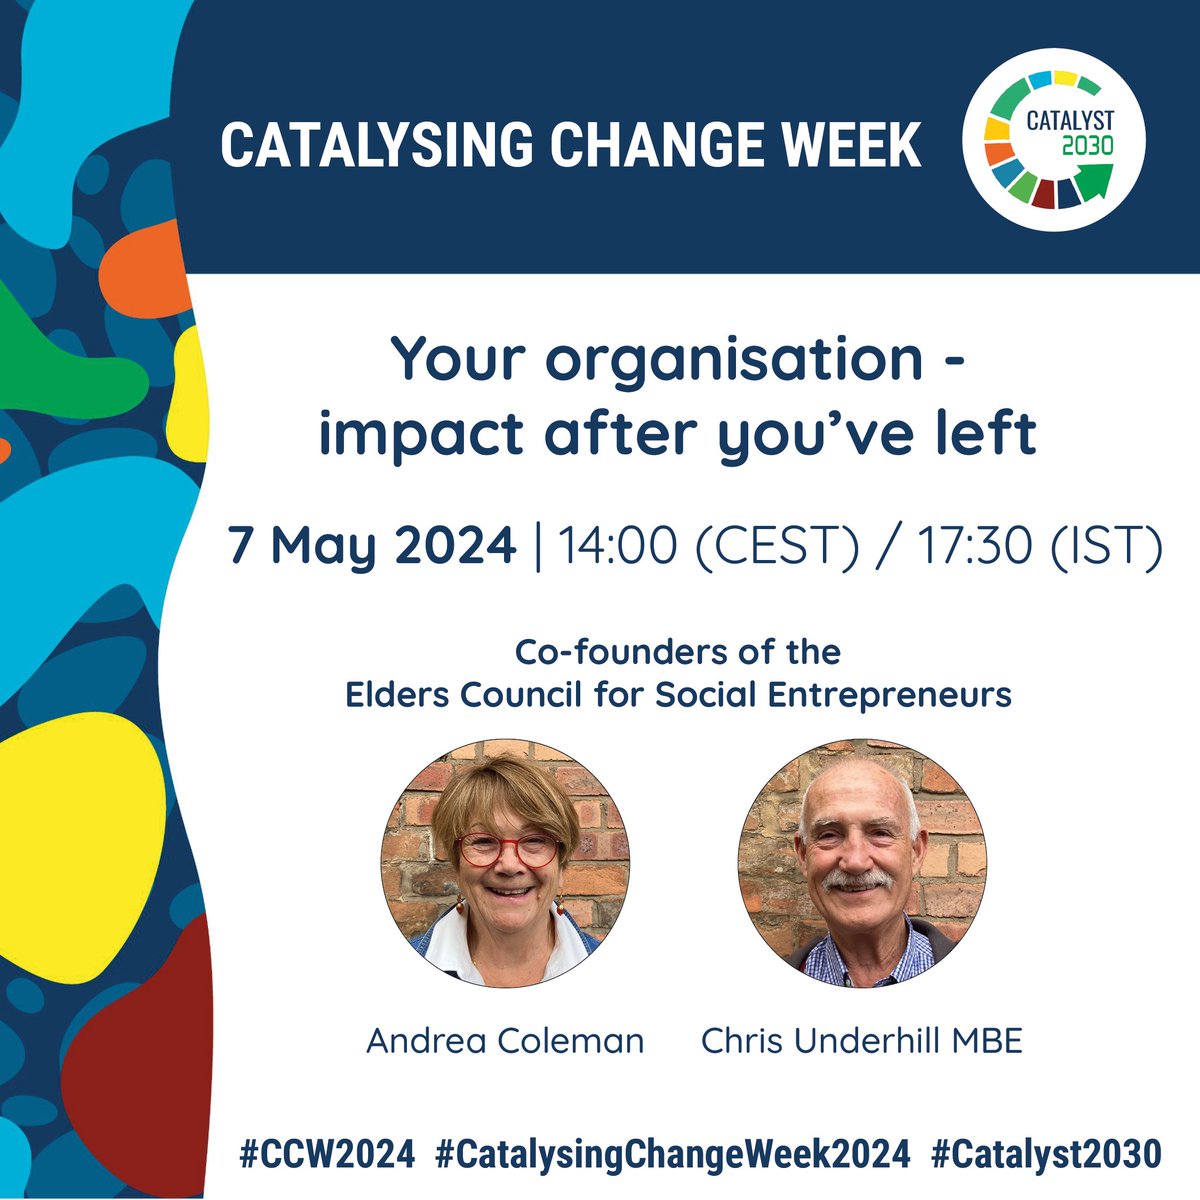 How can #SocialEntrepreneurs ensure that their orgs sustain & increase impact as they prepare to leave? It’s vital we share wisdom on #SuccessionPlanning – so that no progress is lost in the process. 

Register for webinar: catalyst2030.net/events/your-or… 
#CCW2024 #SDGs @Catalyst2030